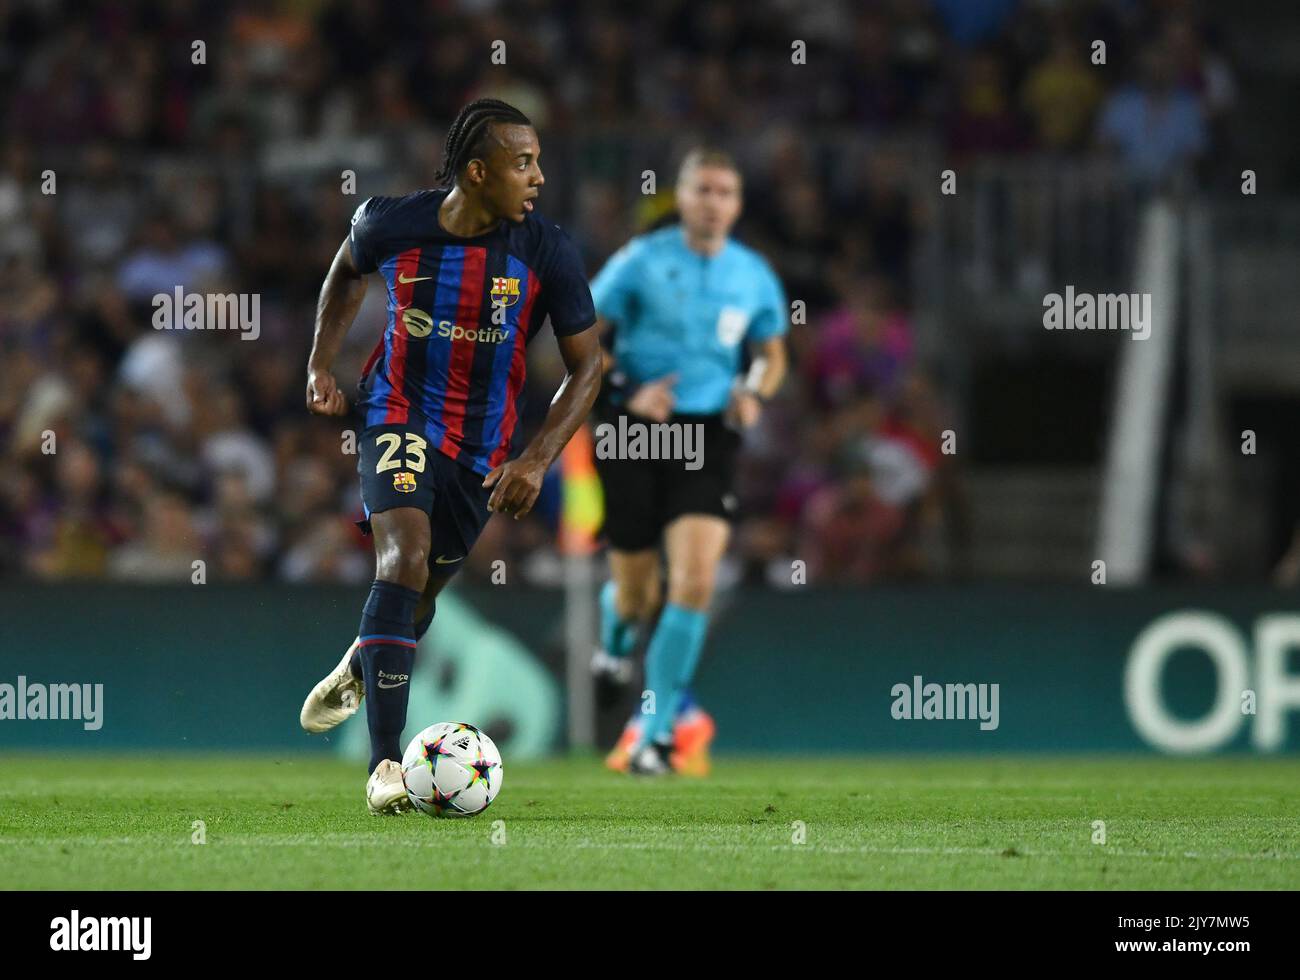 Barcelona, Spain. 07th Sep, 2022. FC BARCELONA vs FC VIKTORIA PLZEN Jules Kounde (23) of FC Barcelona during the match between FC Barcelona and FC Viktoria Plzen corresponding to the first day of the group stage of the UEFA Champions League at Spotify Camp Nou Stadium in Barcelona, Spain. September 7, 2022. Credit: rosdemora/Alamy Live News Stock Photo